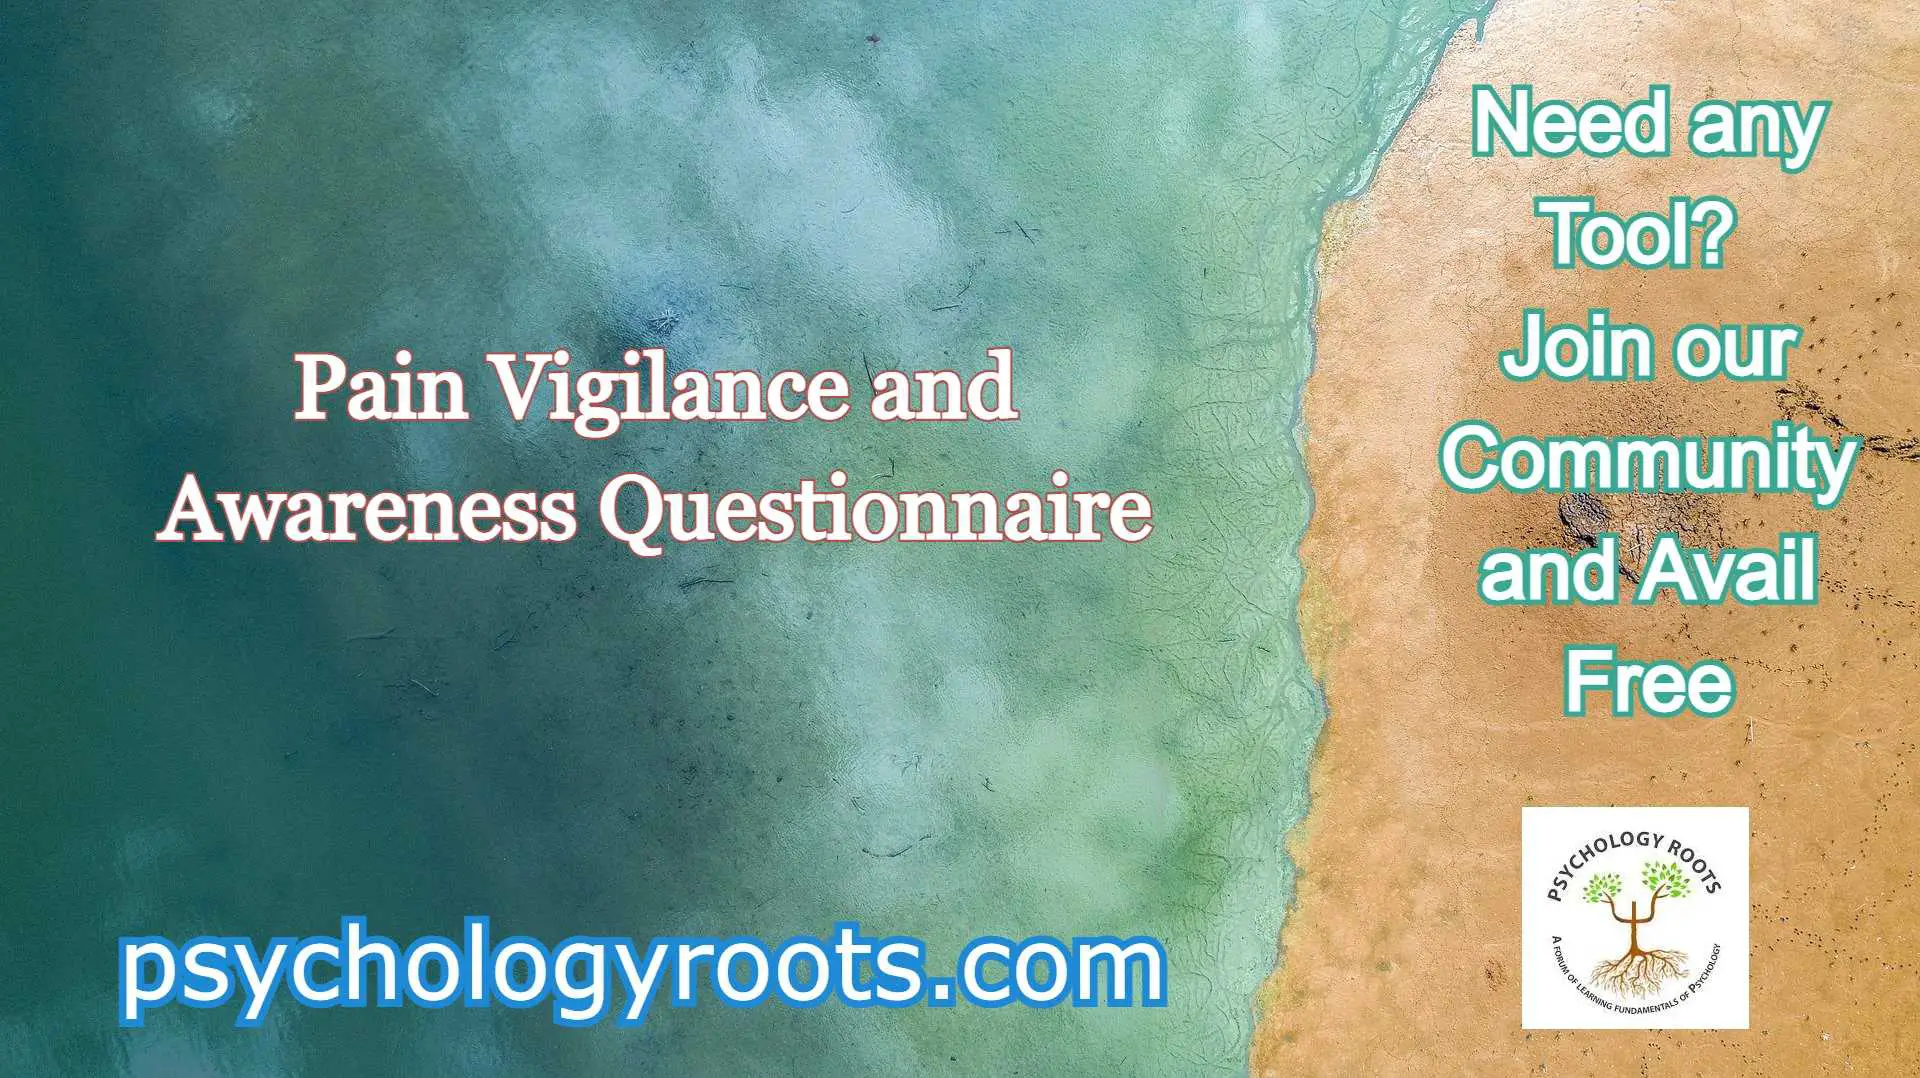 Pain Vigilance and Awareness Questionnaire